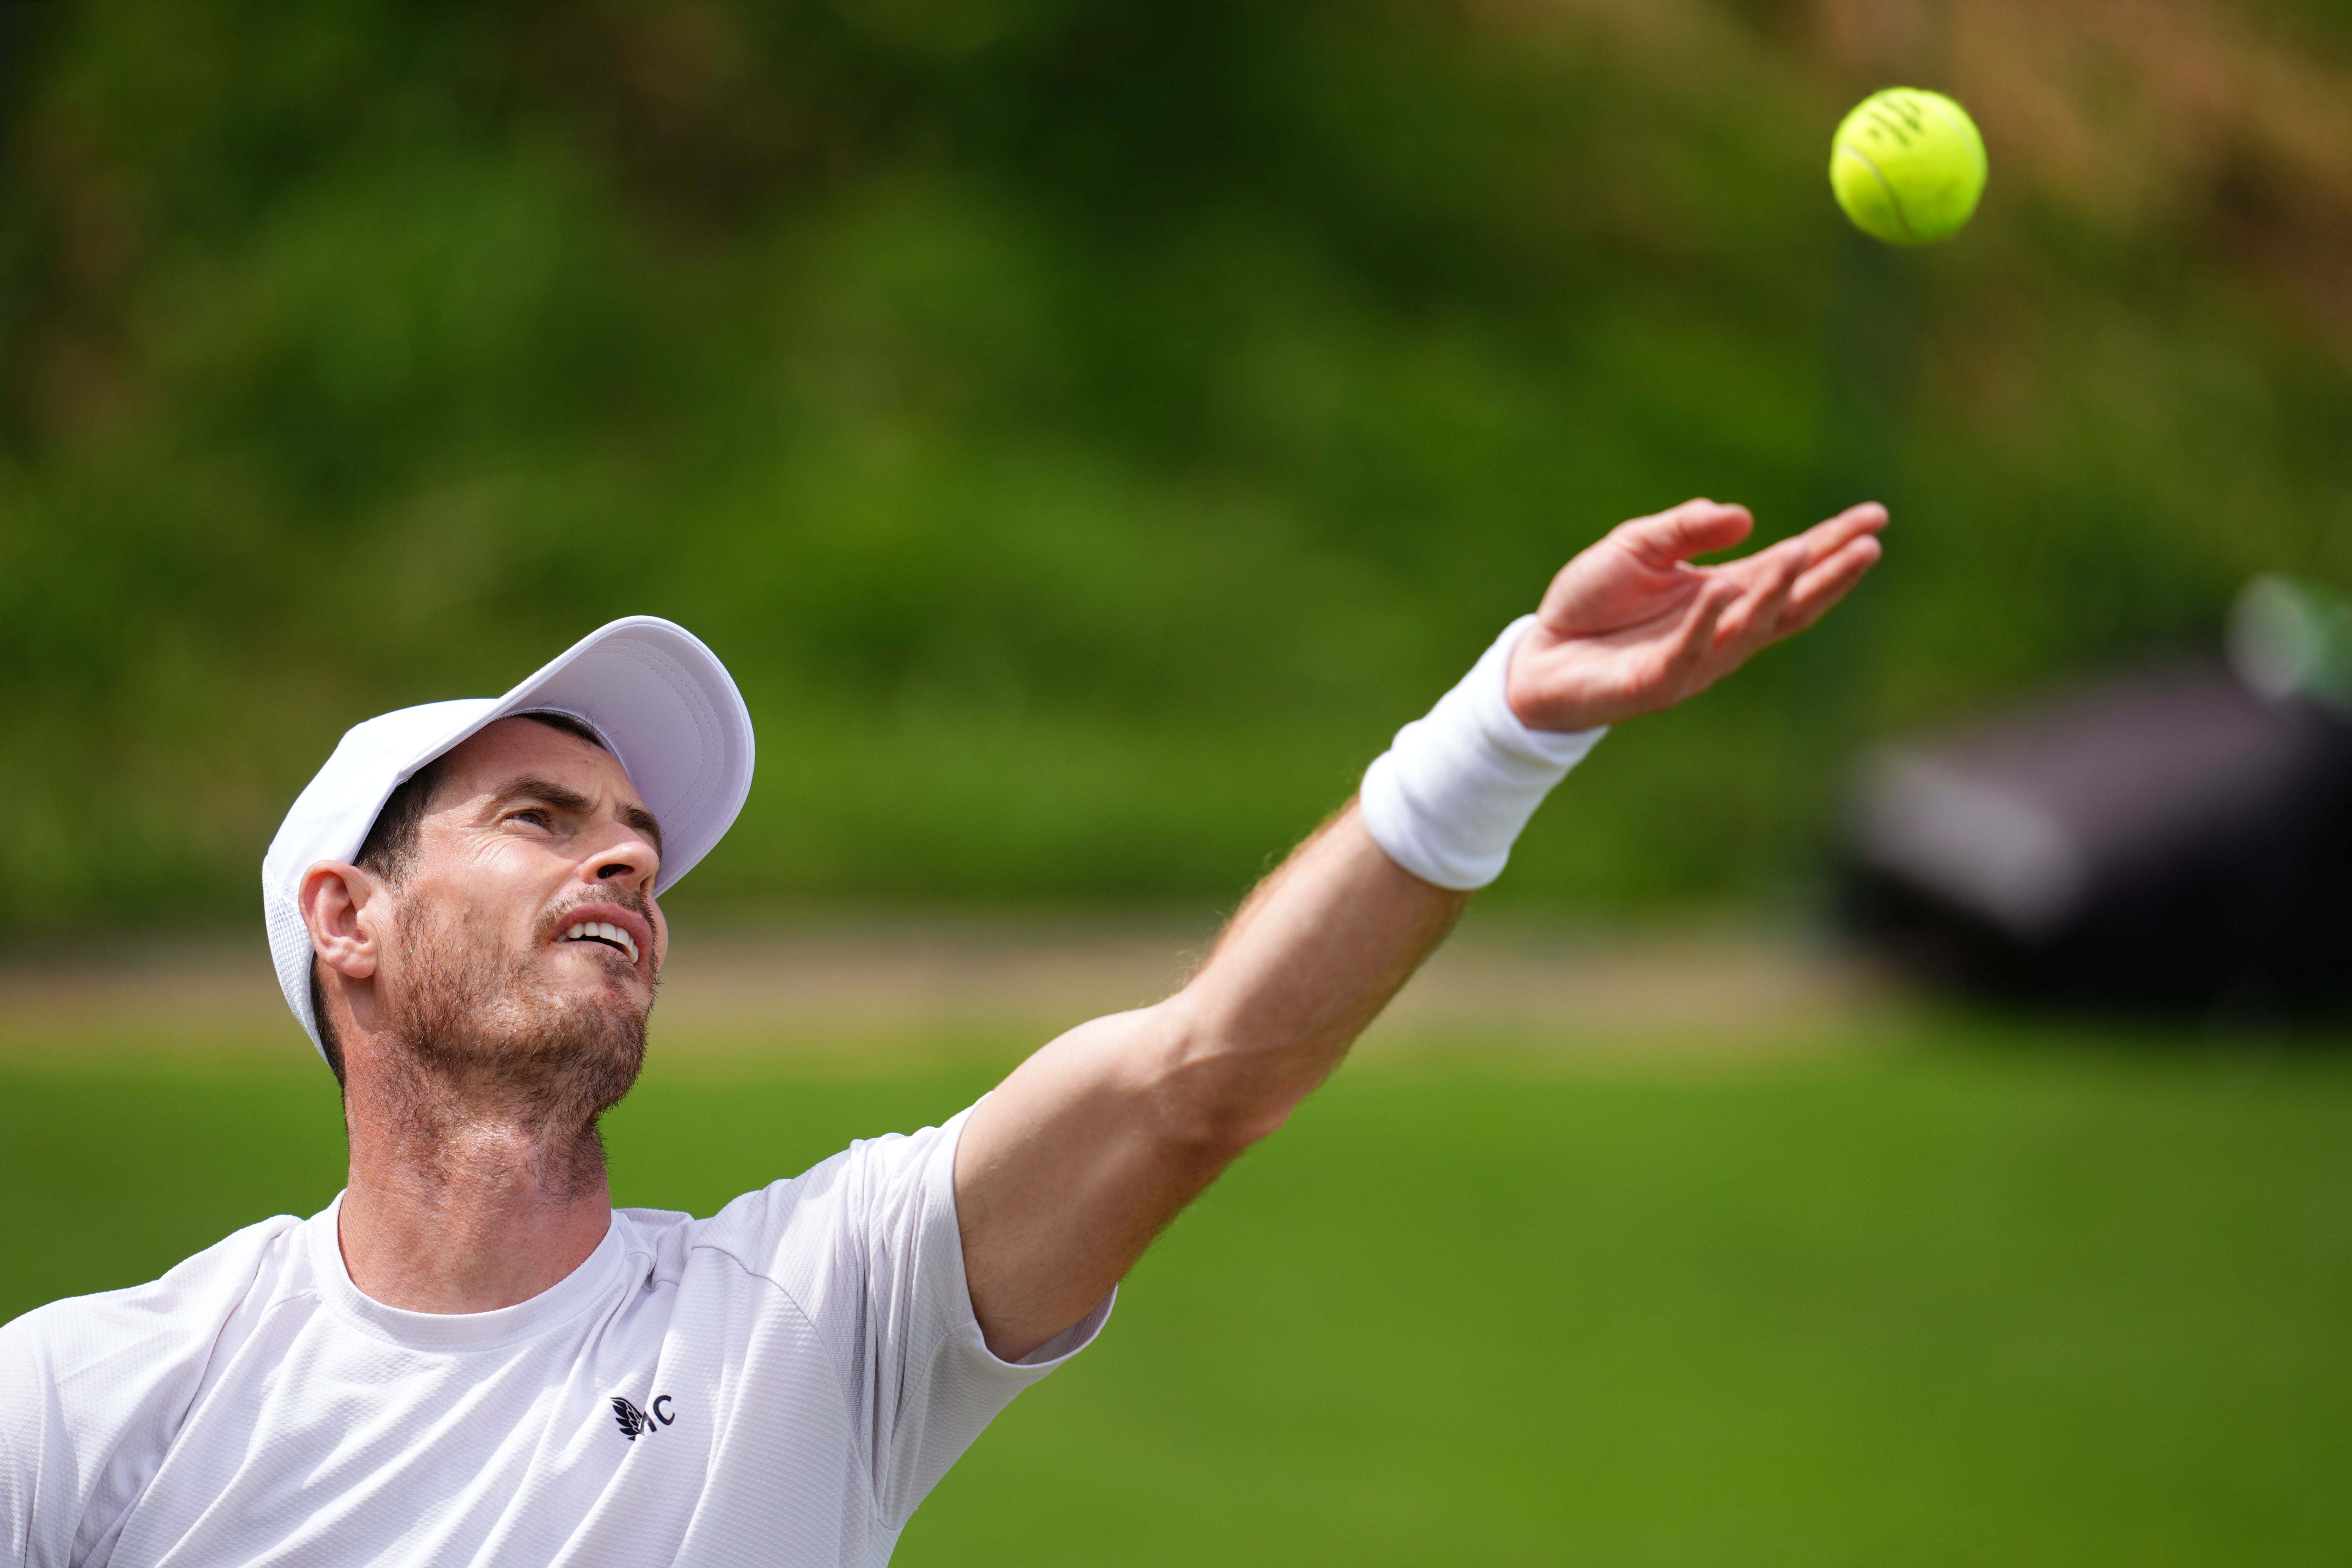 Andy Murray back on the practice court amid doubts over his Wimbledon participation (John Walton/PA)